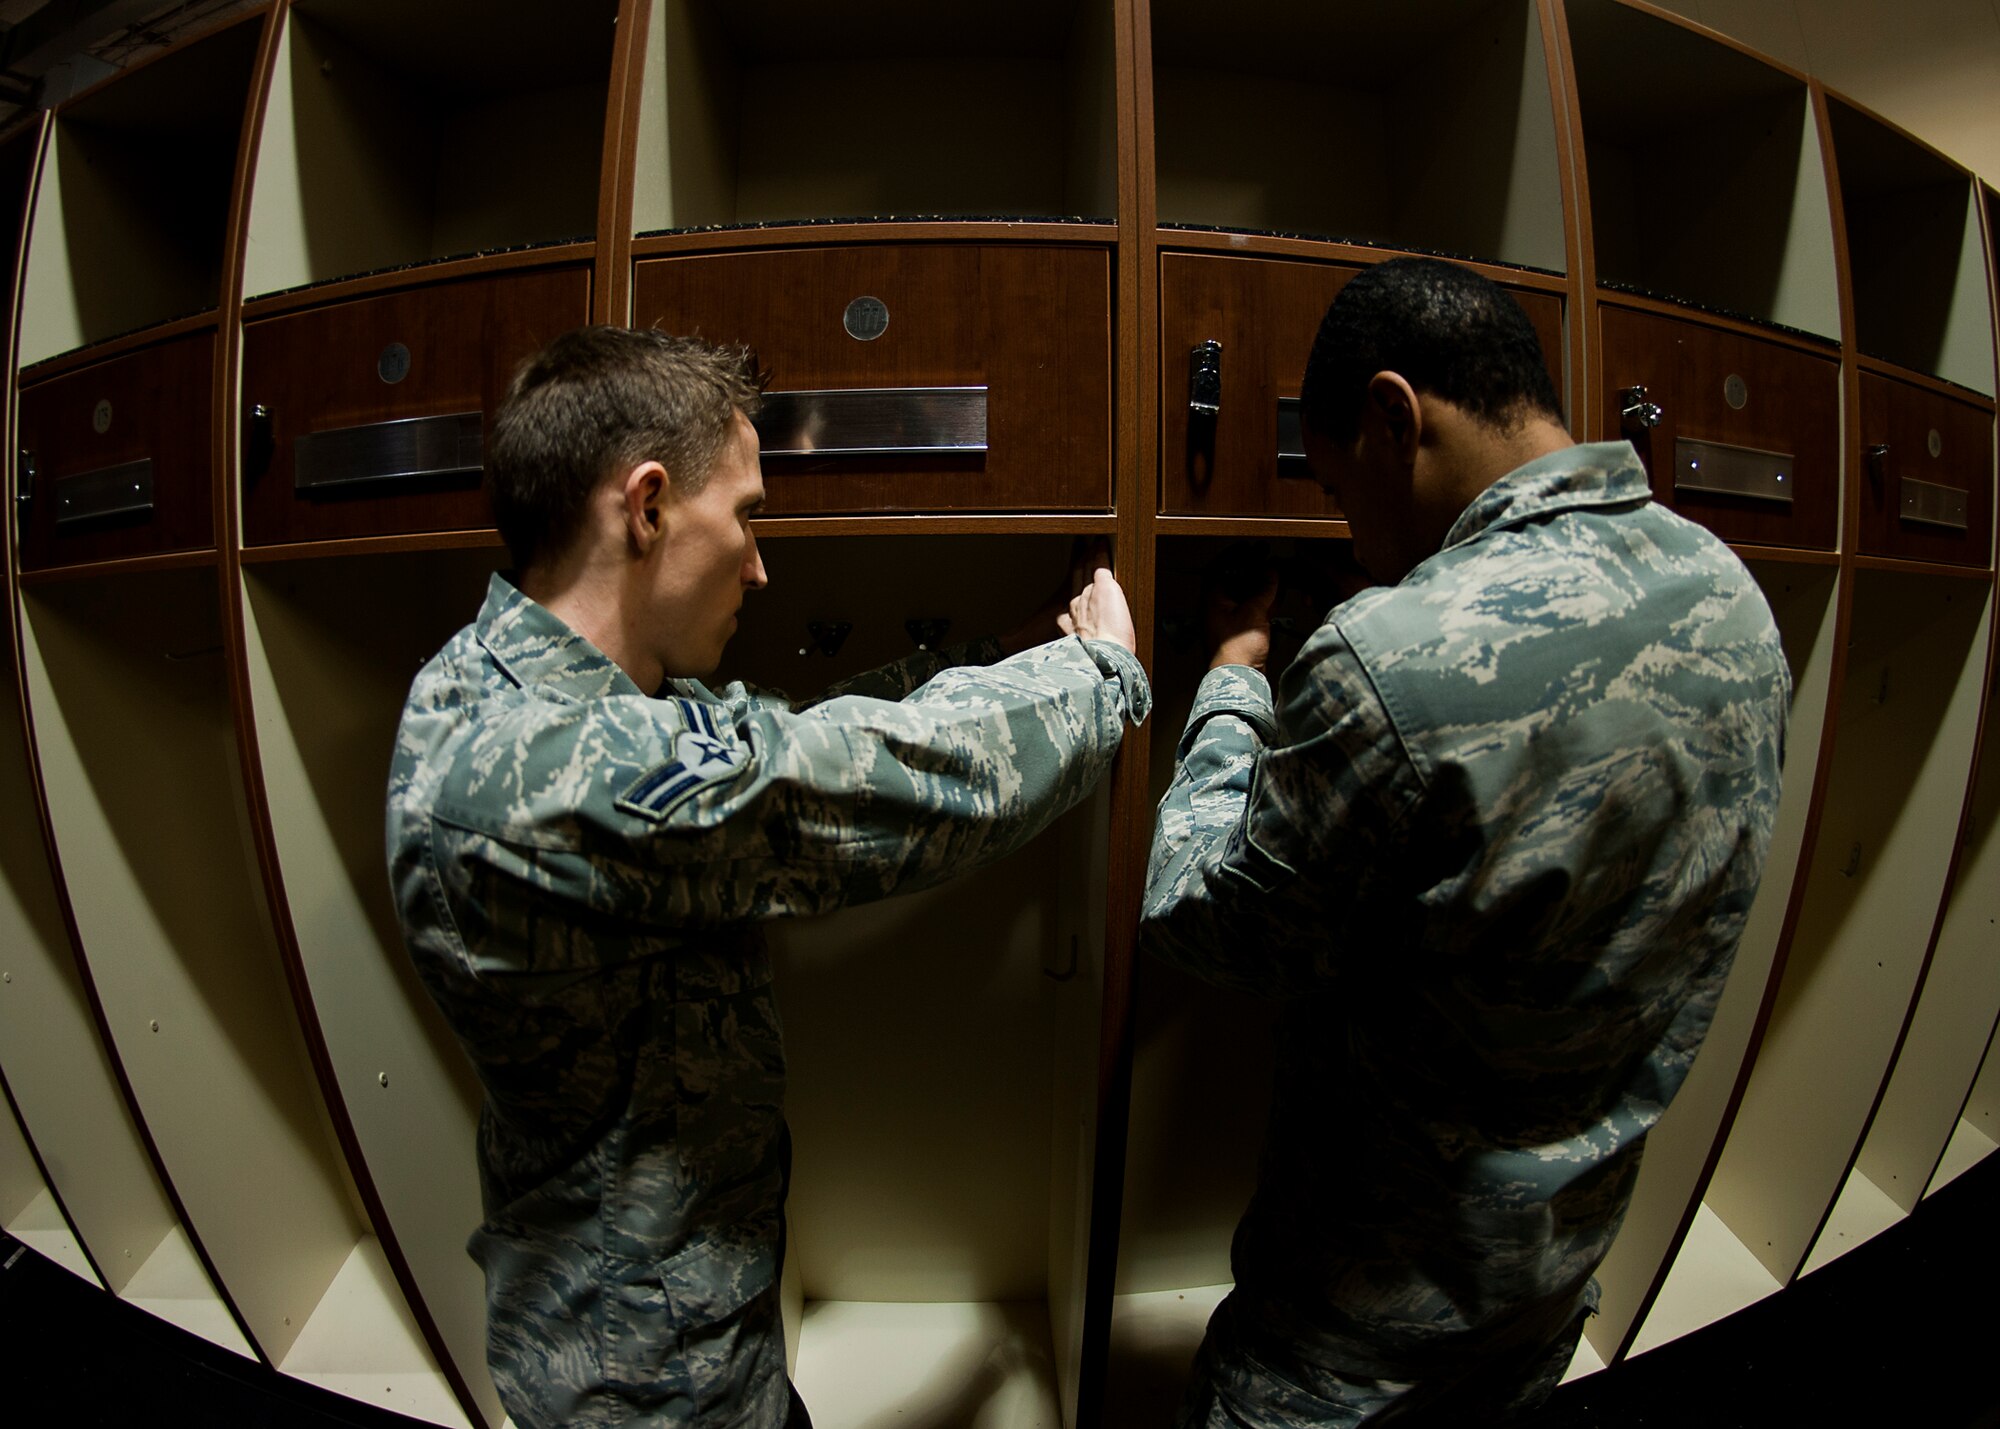 Airman 1st Class Raylan Marcontell, left, and Airman 1st Class Amir Wallace, right, 7th Operations Support Squadron assemble aircrew equipment lockers Jan. 31, 2013, as part of an aircrew flight equipment consolidation project at Dyess Air Force Base, Texas. Airmen from the 7th OSS consolidated more than 280 aircrew equipment lockers into one facility as part of a consolidation project. The project brought the oxygen section and flightline section of aircrew flight equipment into one facility. Contractors projected that the consolidation would cost the Air Force between $15,000 and $20,000, but 7th OSS Airmen completed the job for much less. Thanks to the large number of Airmen who volunteered to help, the project was completed in under a week. (U.S. Air Force photo by Airman 1st Class Damon Kasberg/ Released)